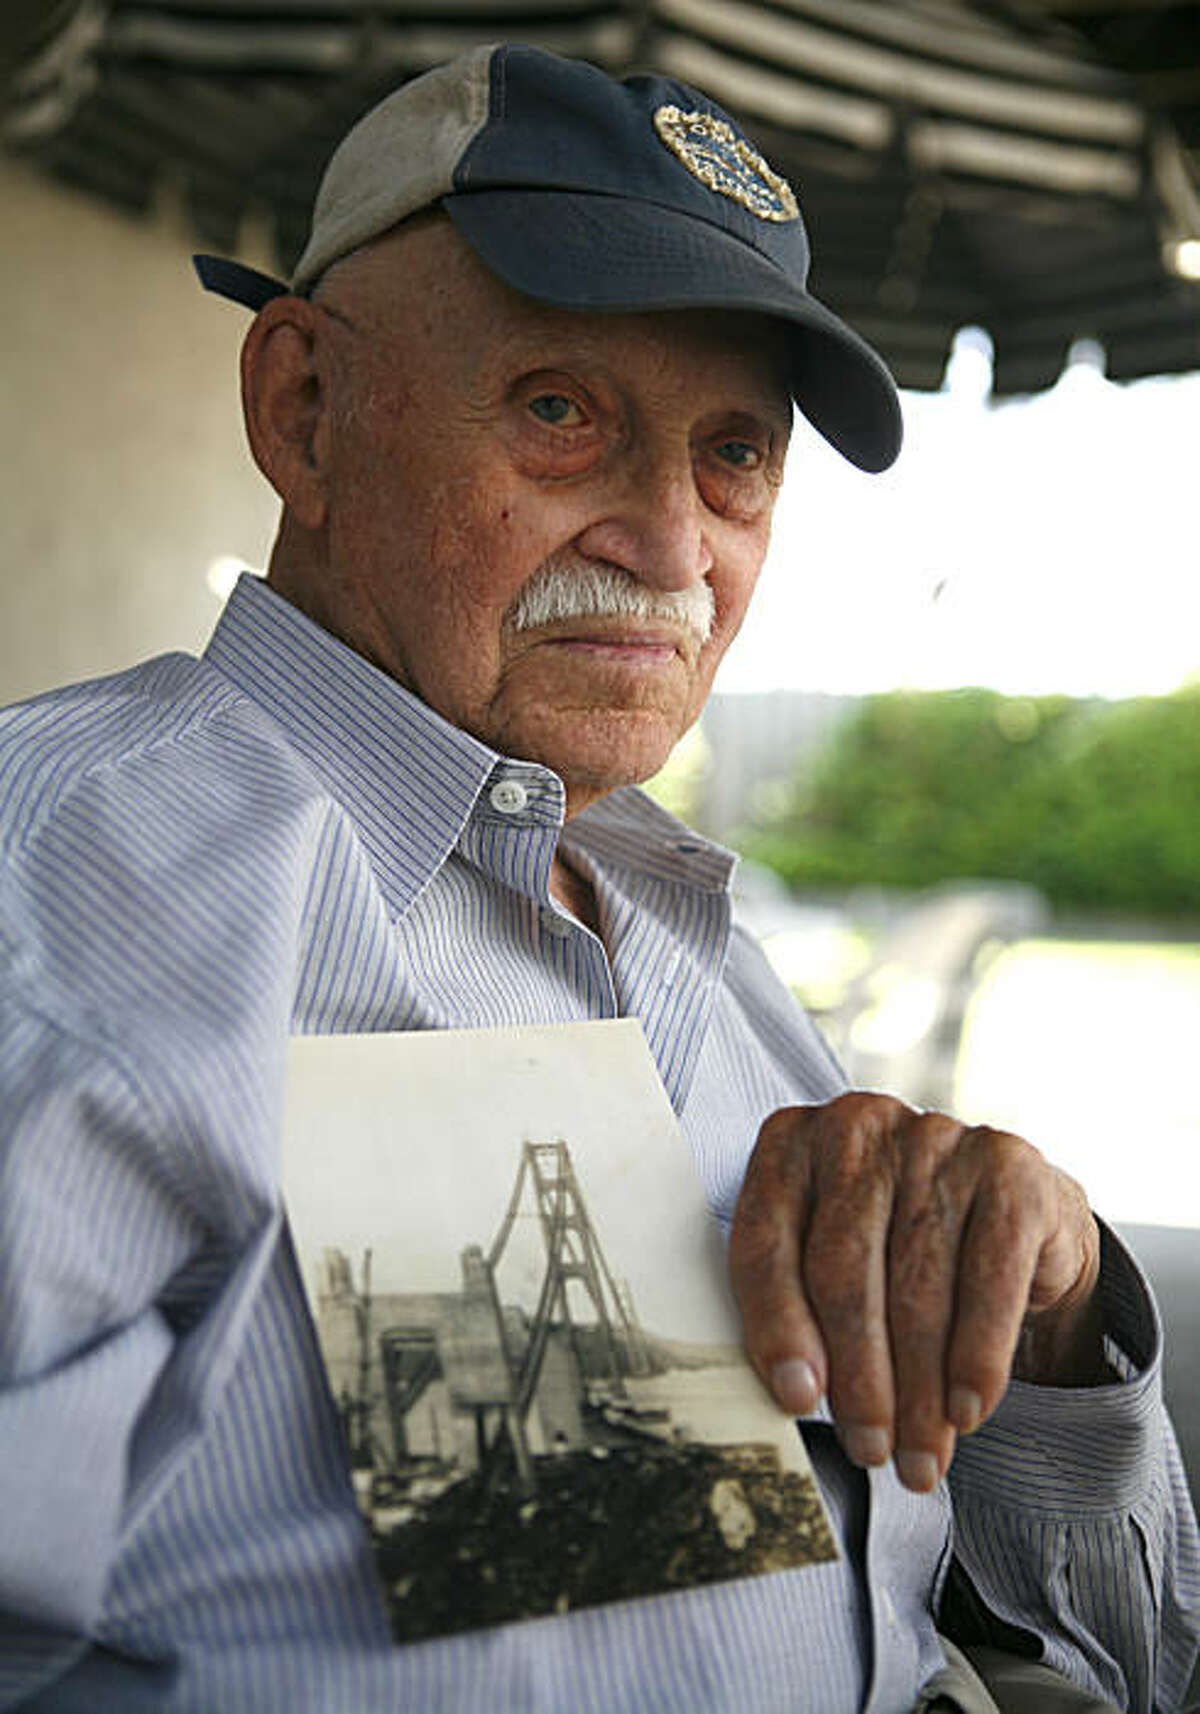 97-year old Harry Fogle, one of the last original workers who worked on the Golden Gate Bridge, holds a photo of the Golden Gate Bridge while it was being built on Thursday August 6, 2010 in Citrus Heights, Calif. Fogel worked as a painter.